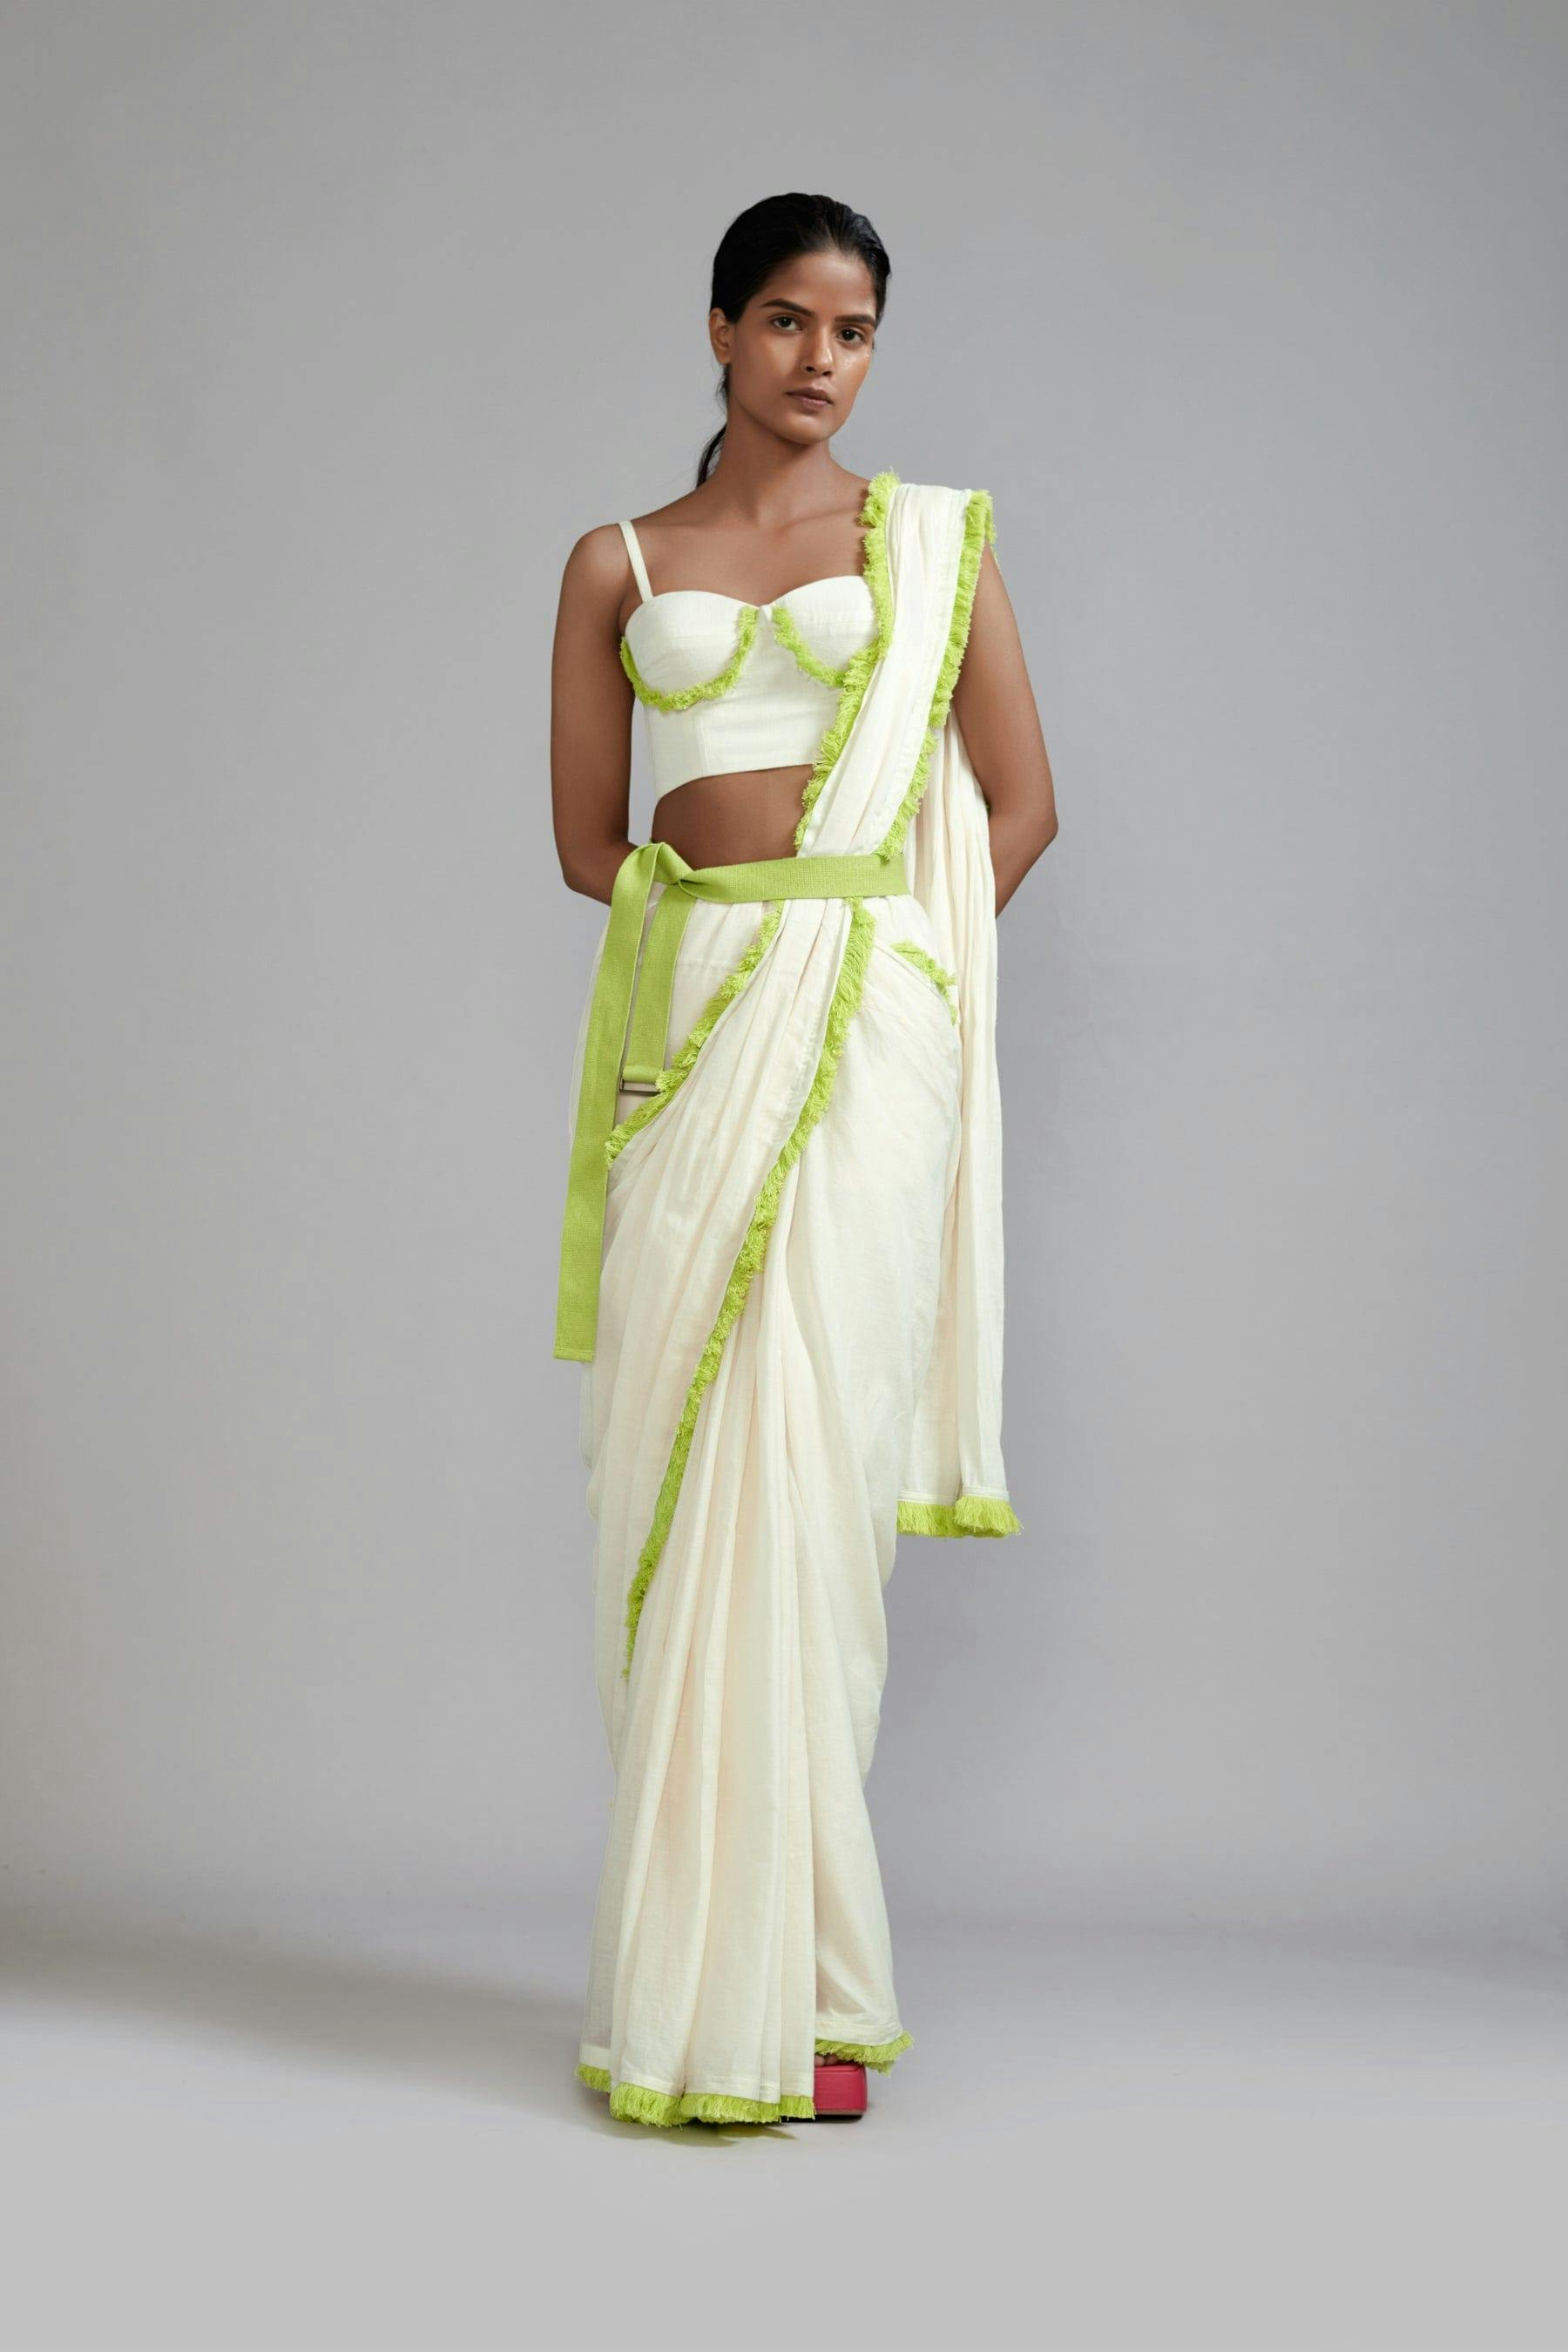 Off-White with Neon Green Saree & Fringed Corset Set (2 PCS), a product by Style Mati